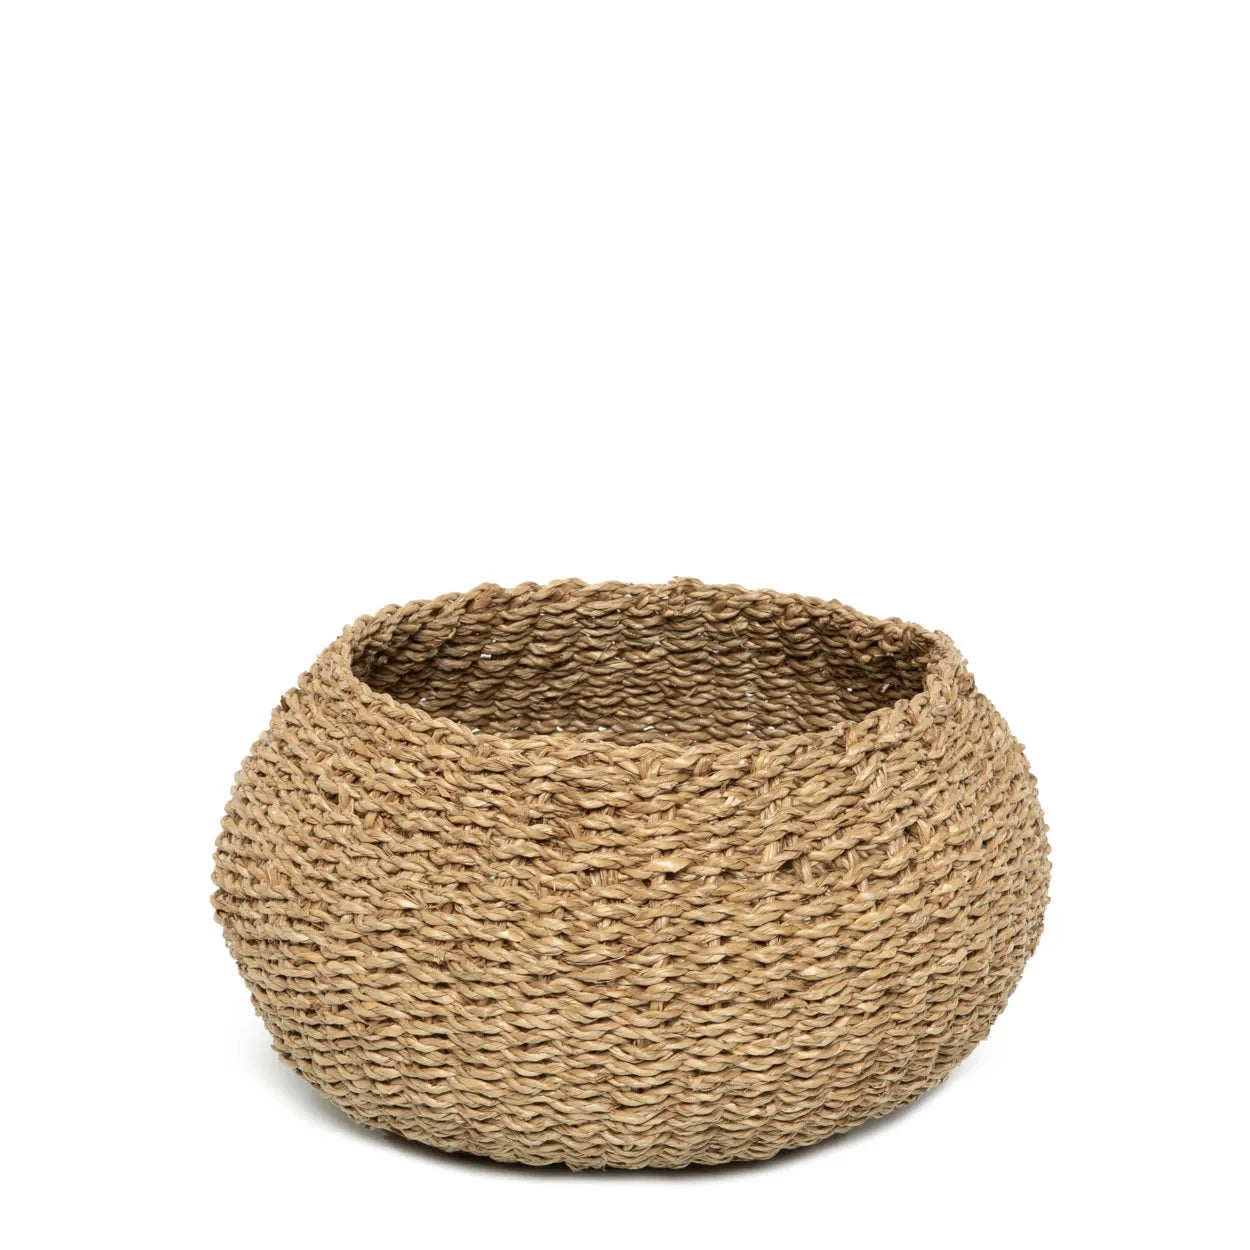 Altea Ho Coc Baskets - seagrass storage containers